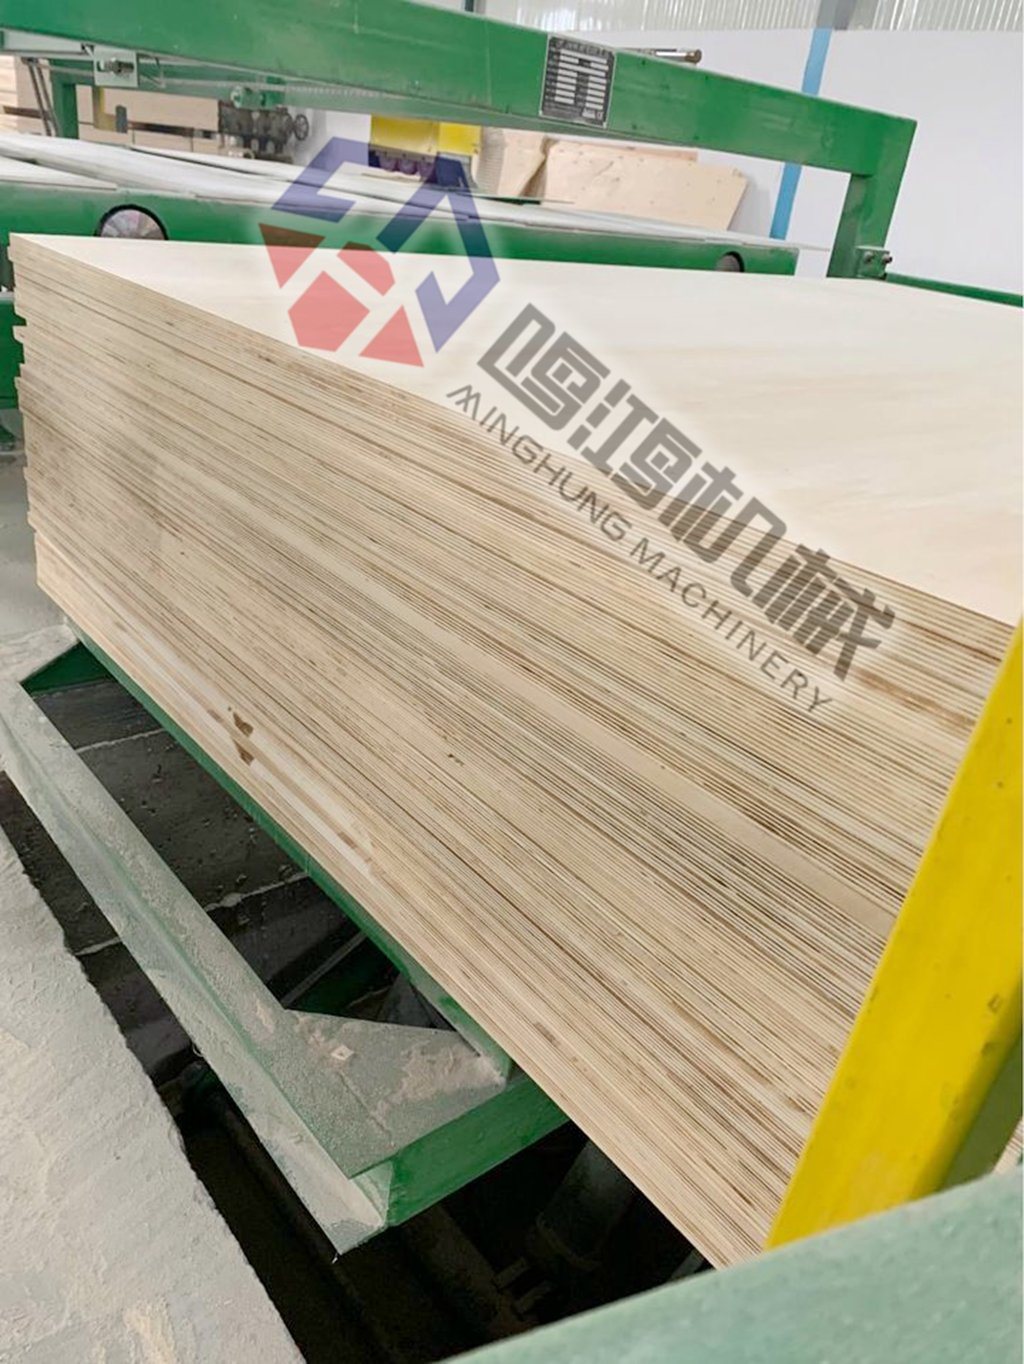 Machine for Trimming Cutting Plywood Edges